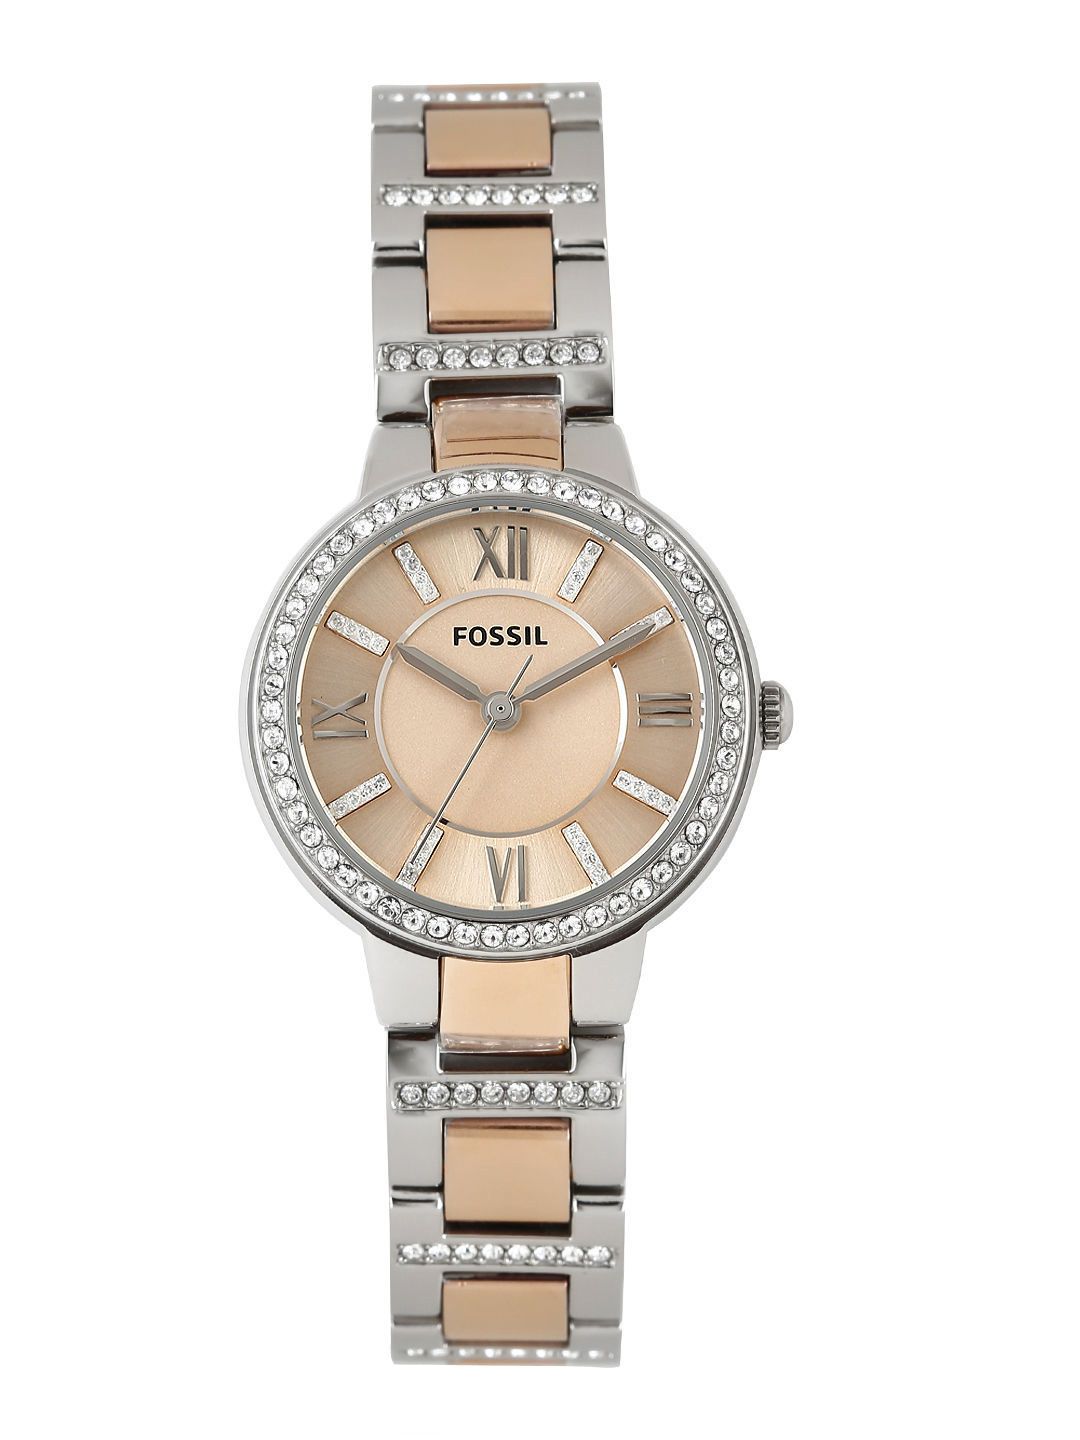 Fossil Women Rose Gold-Toned Dial Watch ES3405 Price in India